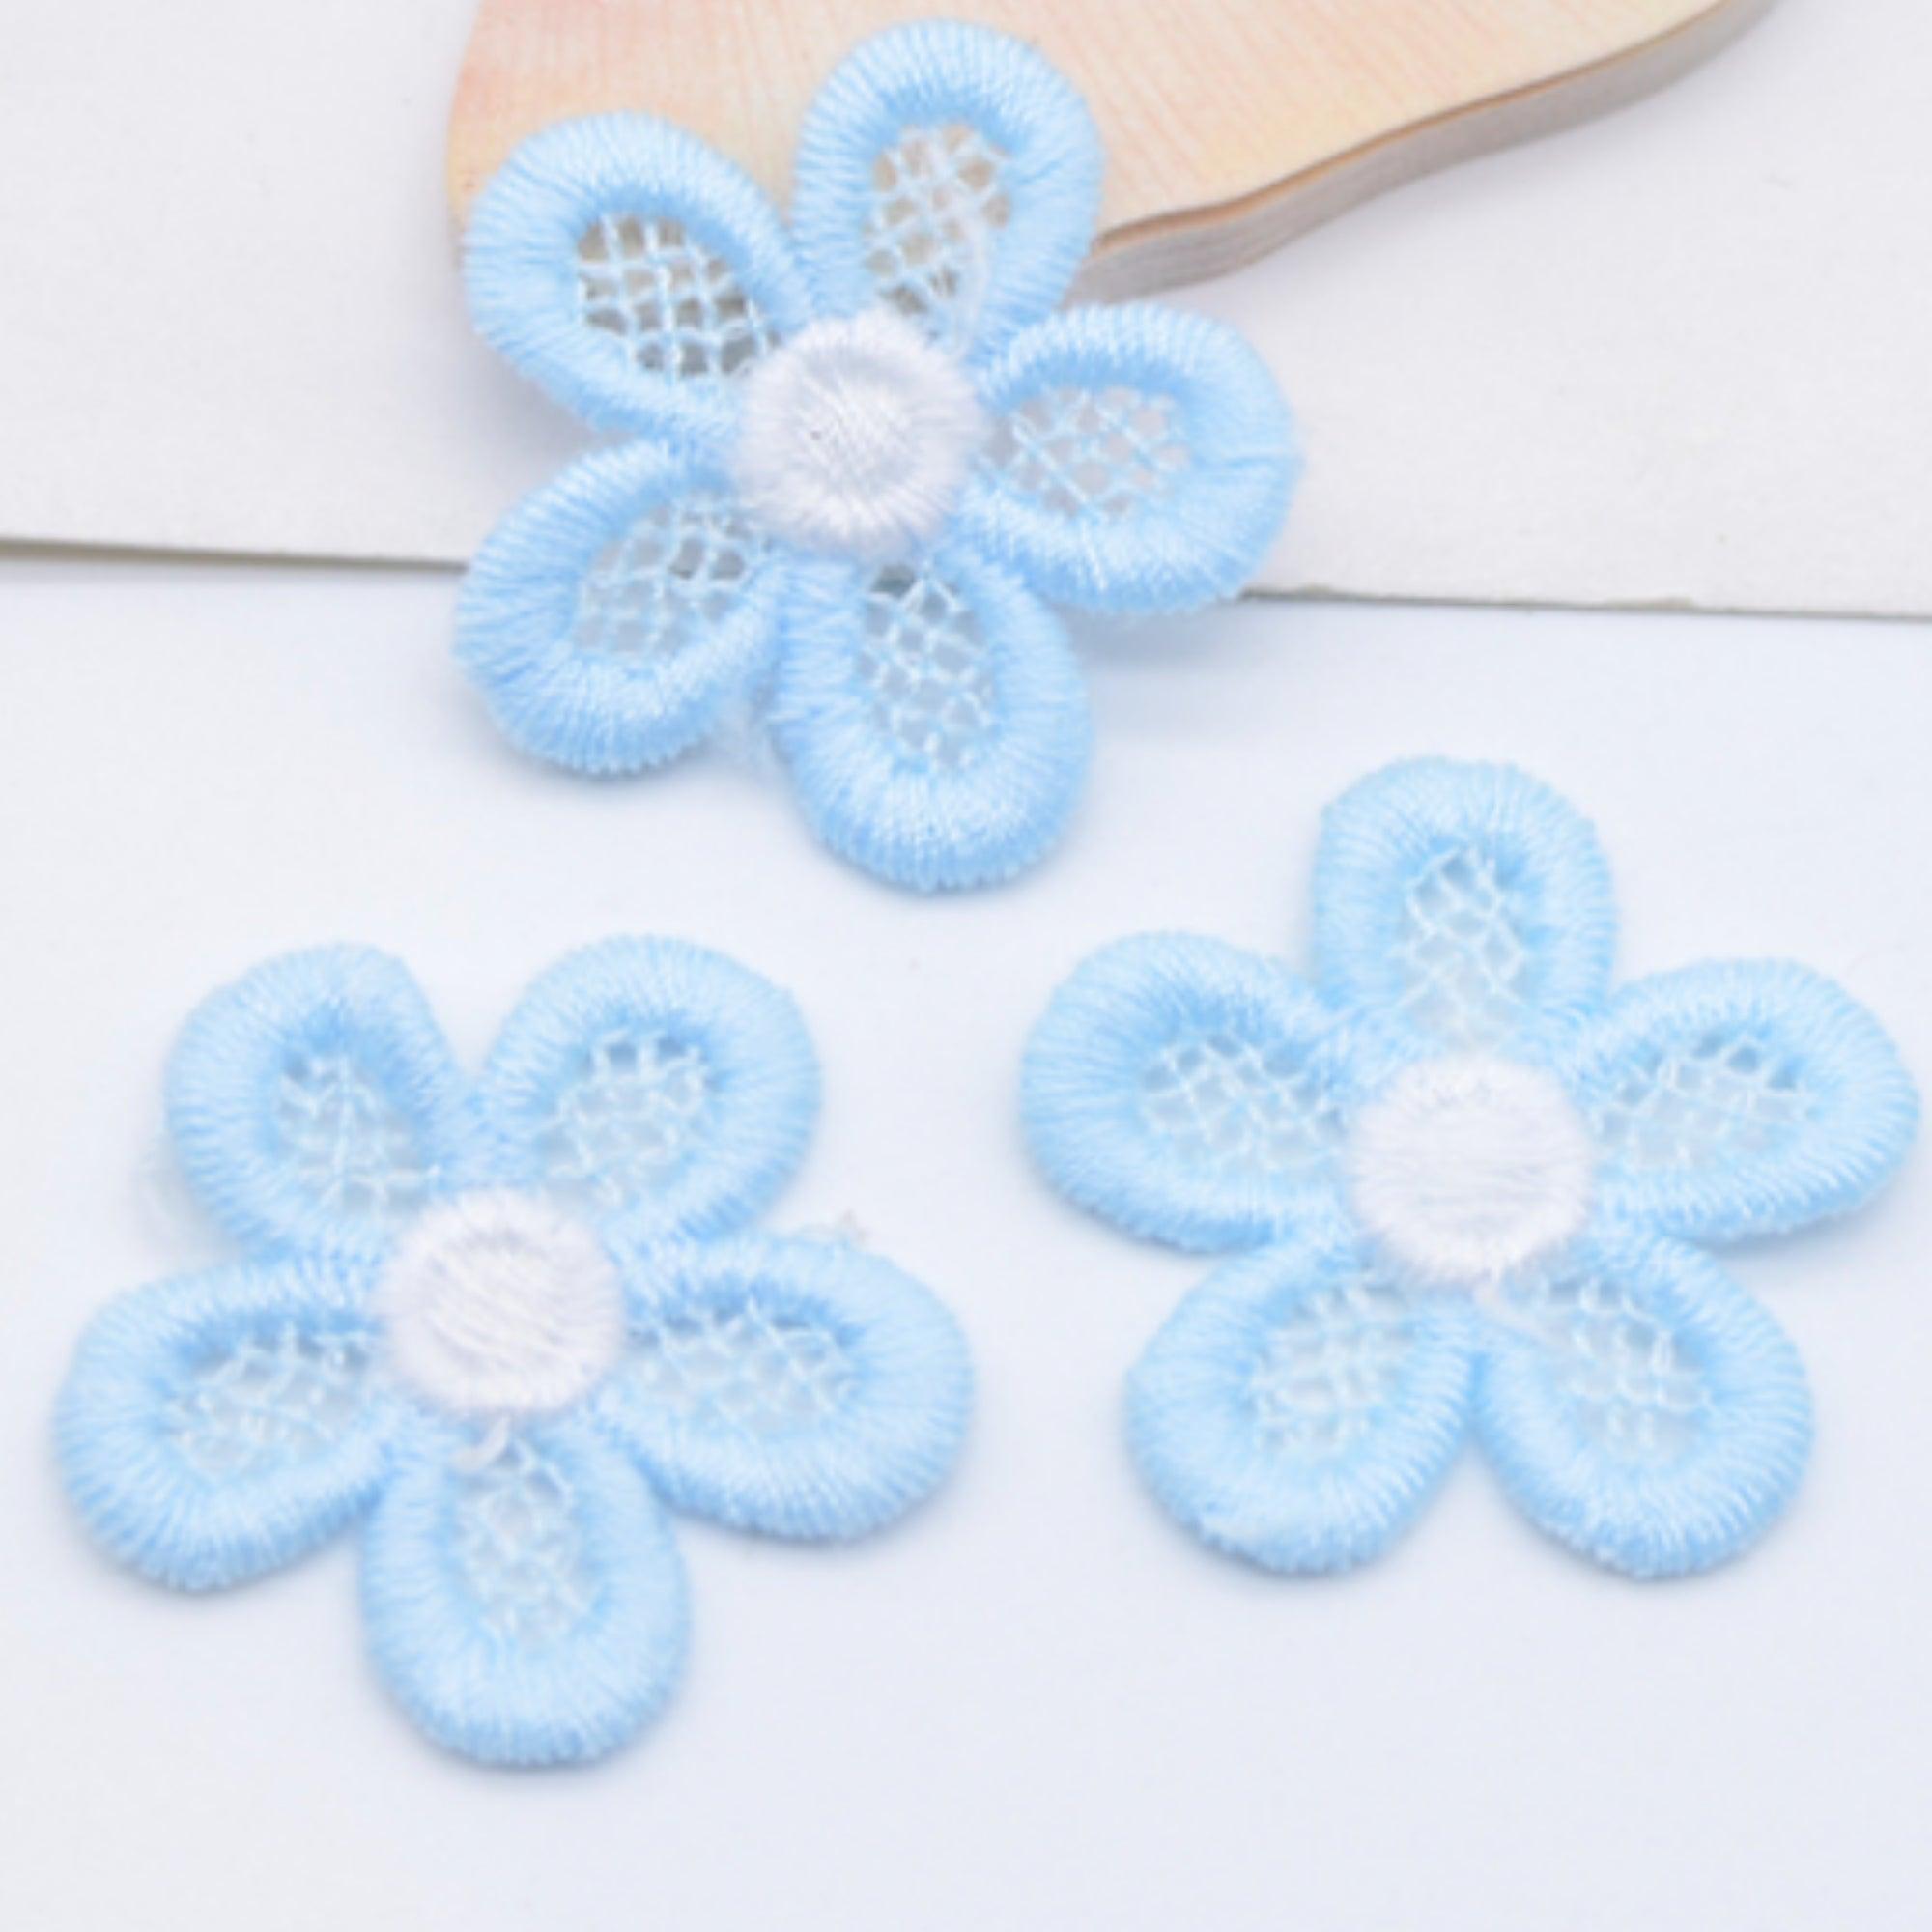 Embroidered Daisies Collection Blue & White 1" Scrapbook Flower Embellishments by SSC Designs - 10 Pieces - Scrapbook Supply Companies